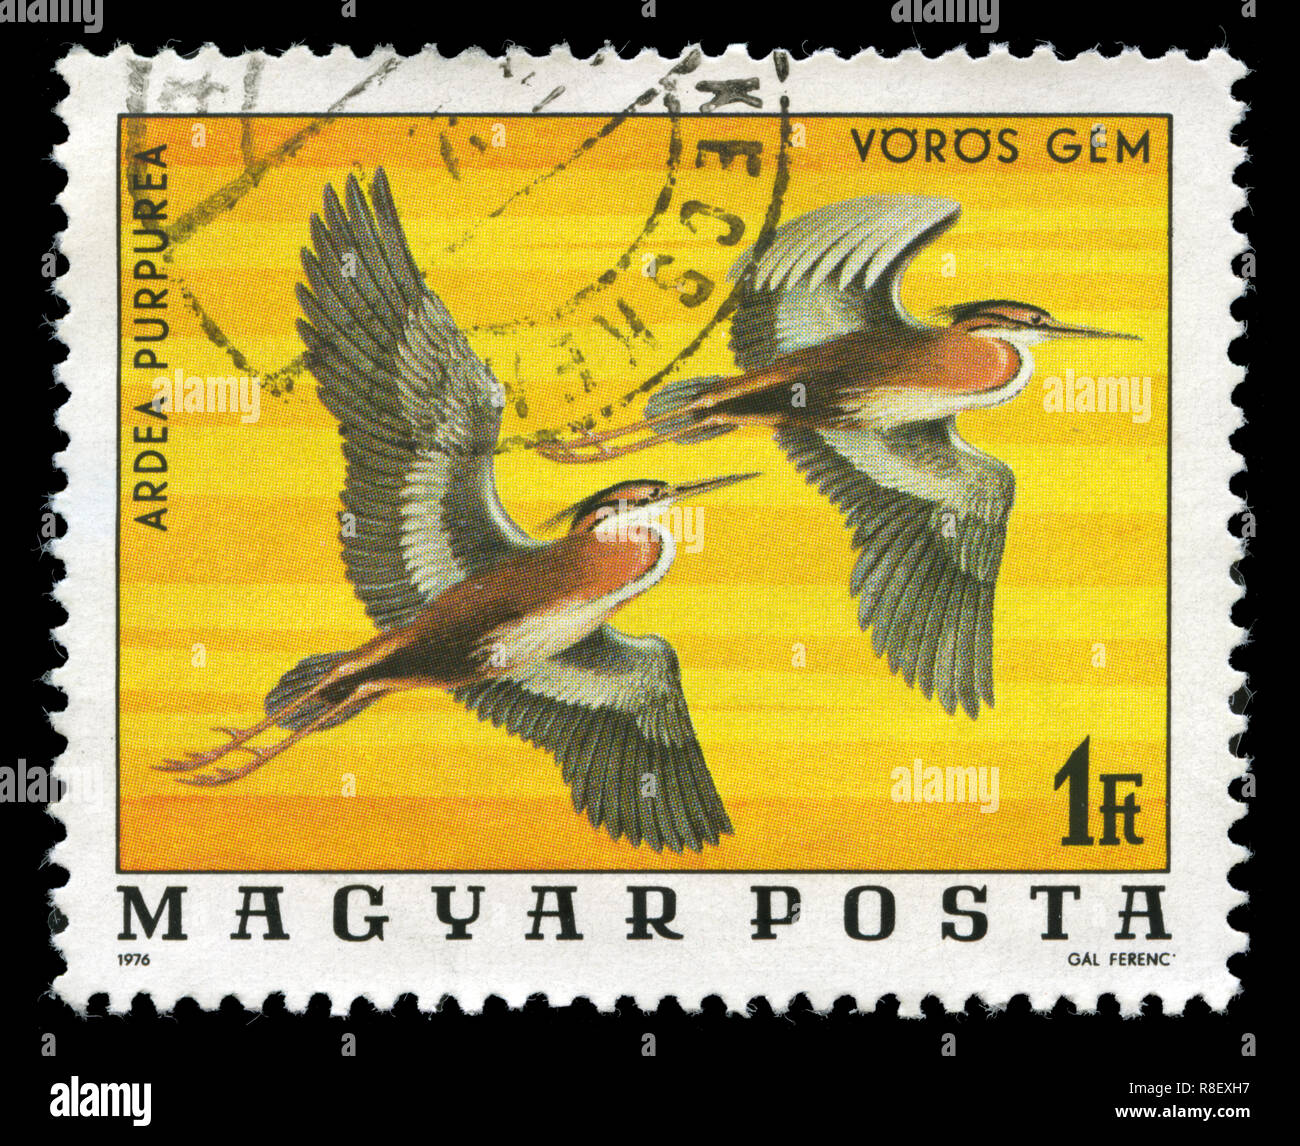 Postage stamp from Hungary in the Birds from Hortobágy National Park series issued in 1977 Stock Photo